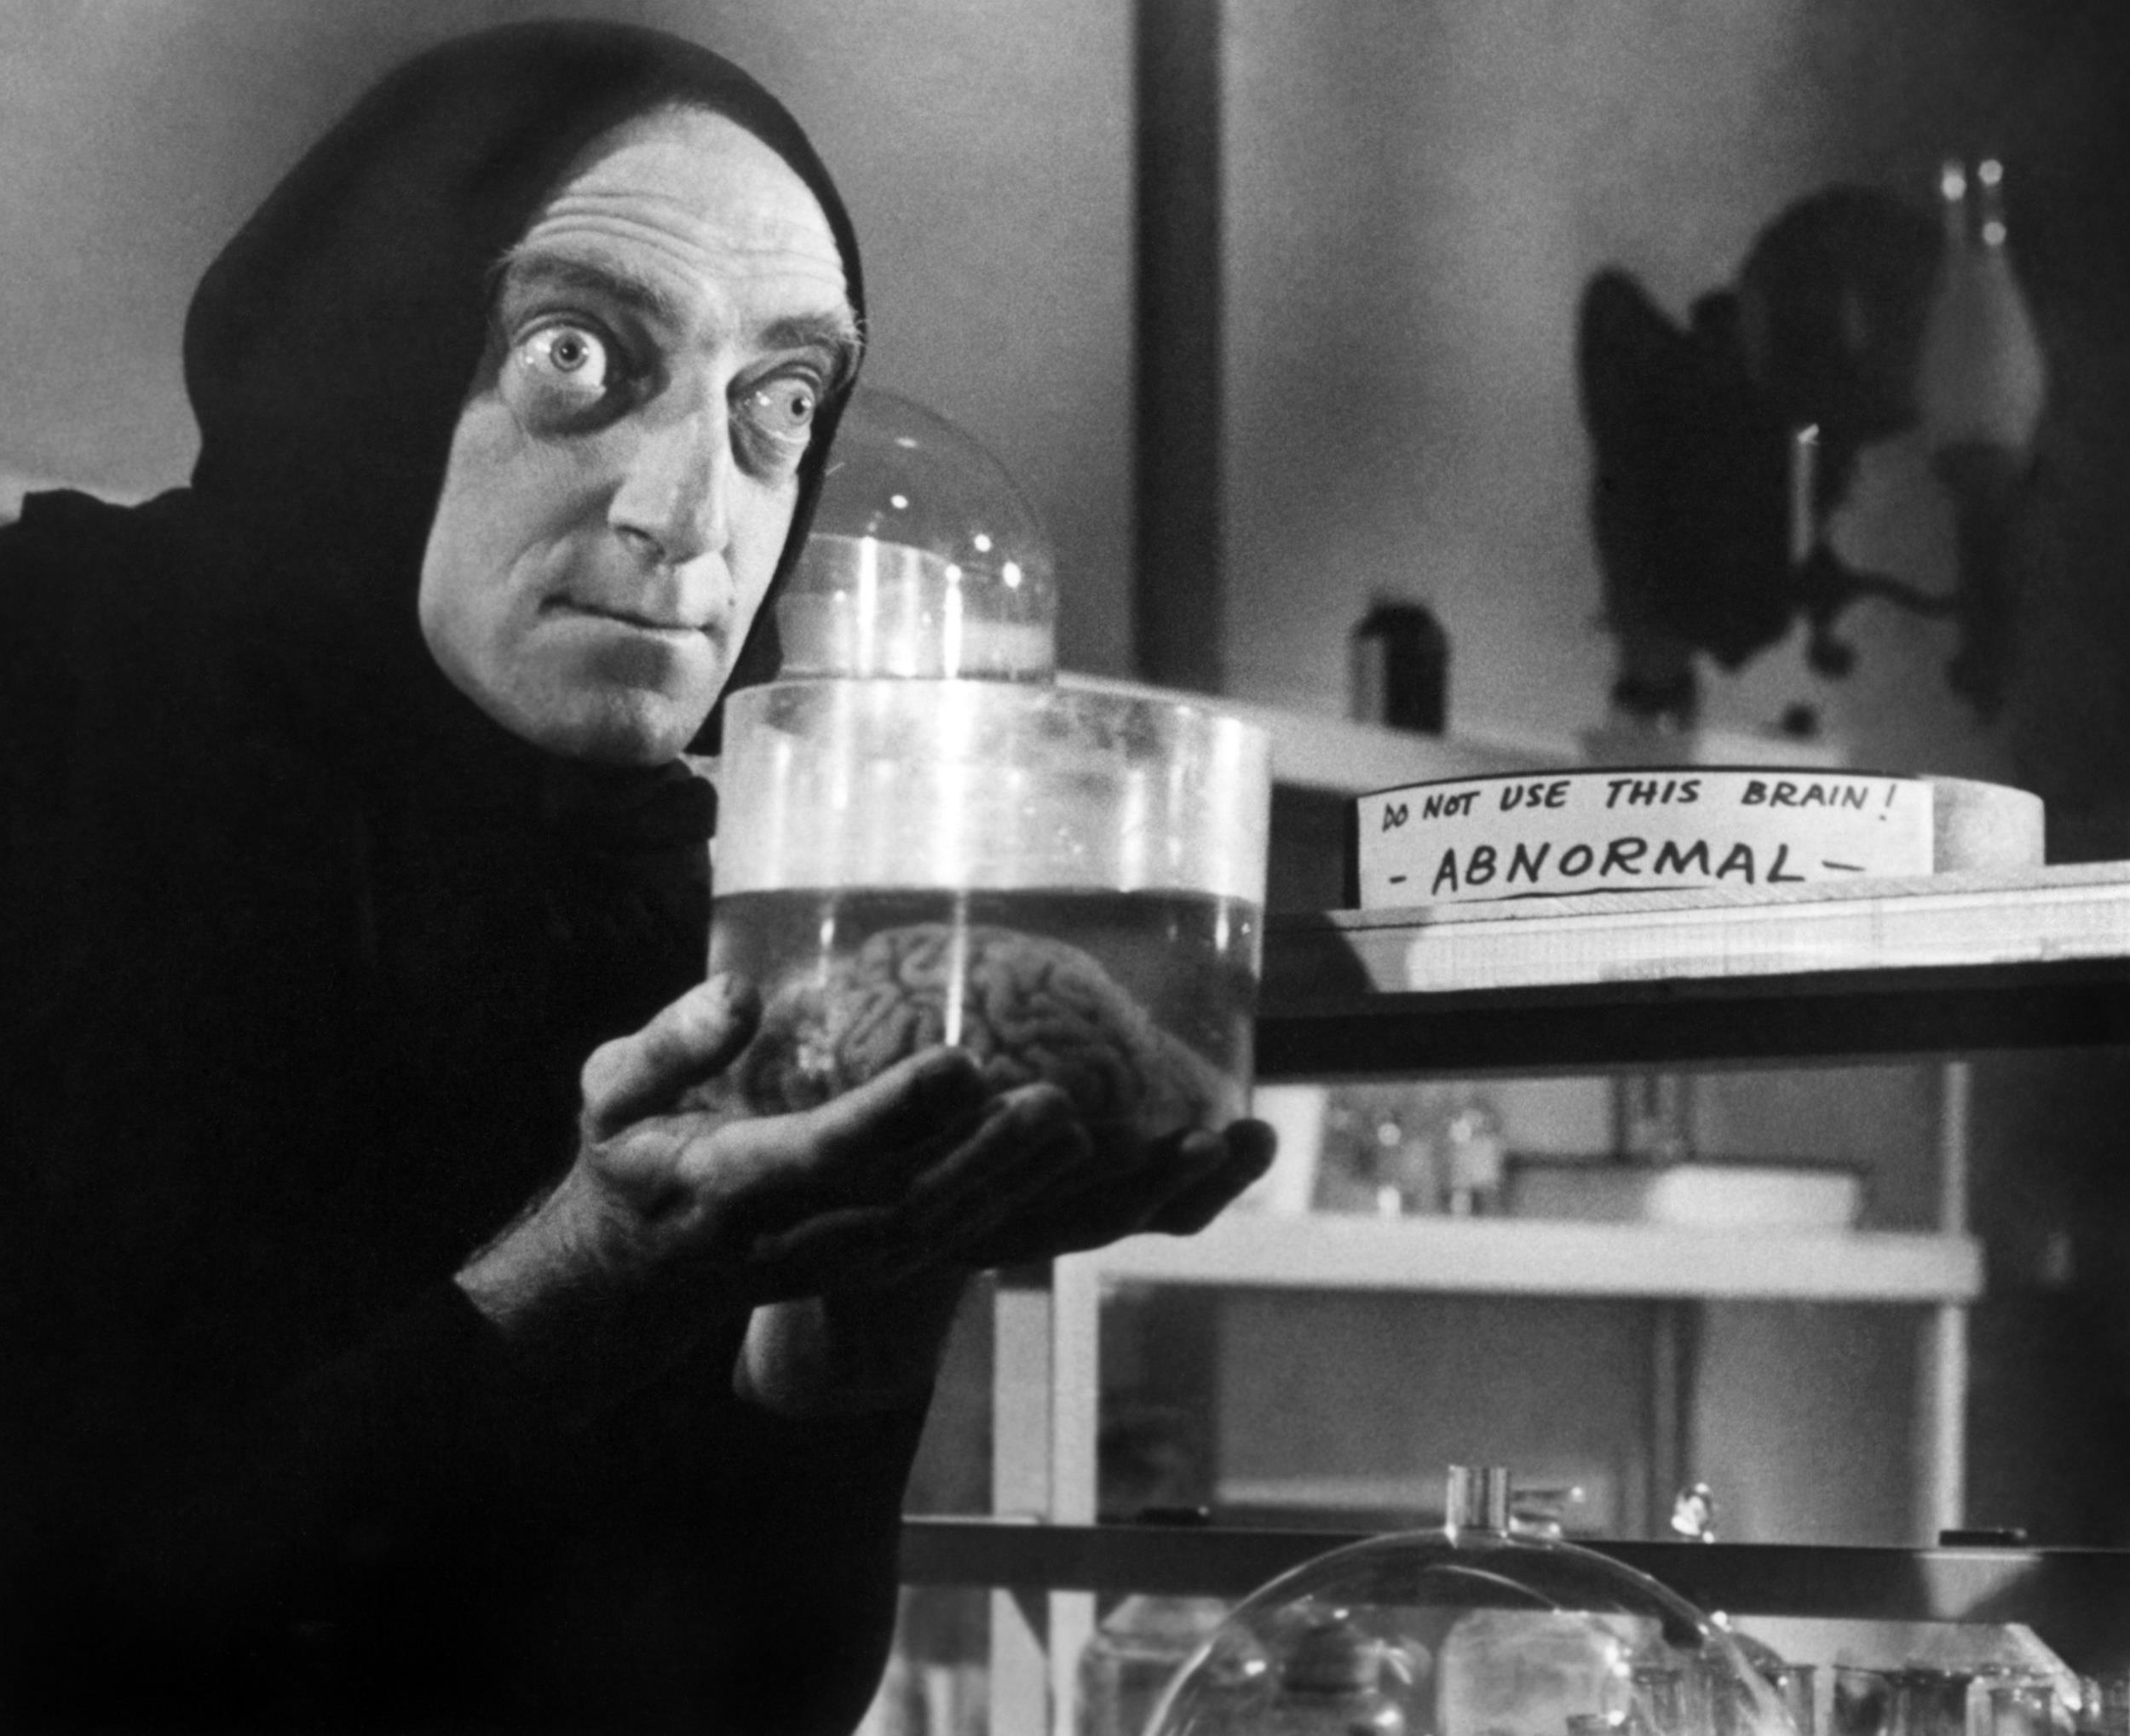 <p>There was only one choice for the role of Igor, at least as far as Wilder was concerned. He wrote the role for British character actor Marty Feldman, and Feldman agreed to take the role, making that process simple enough for the film.</p><p>You may also like: <a href='https://www.yardbarker.com/entertainment/articles/20_movie_remakes_that_are_better_than_the_original_021224/s1__39563151'>20 movie remakes that are better than the original</a></p>